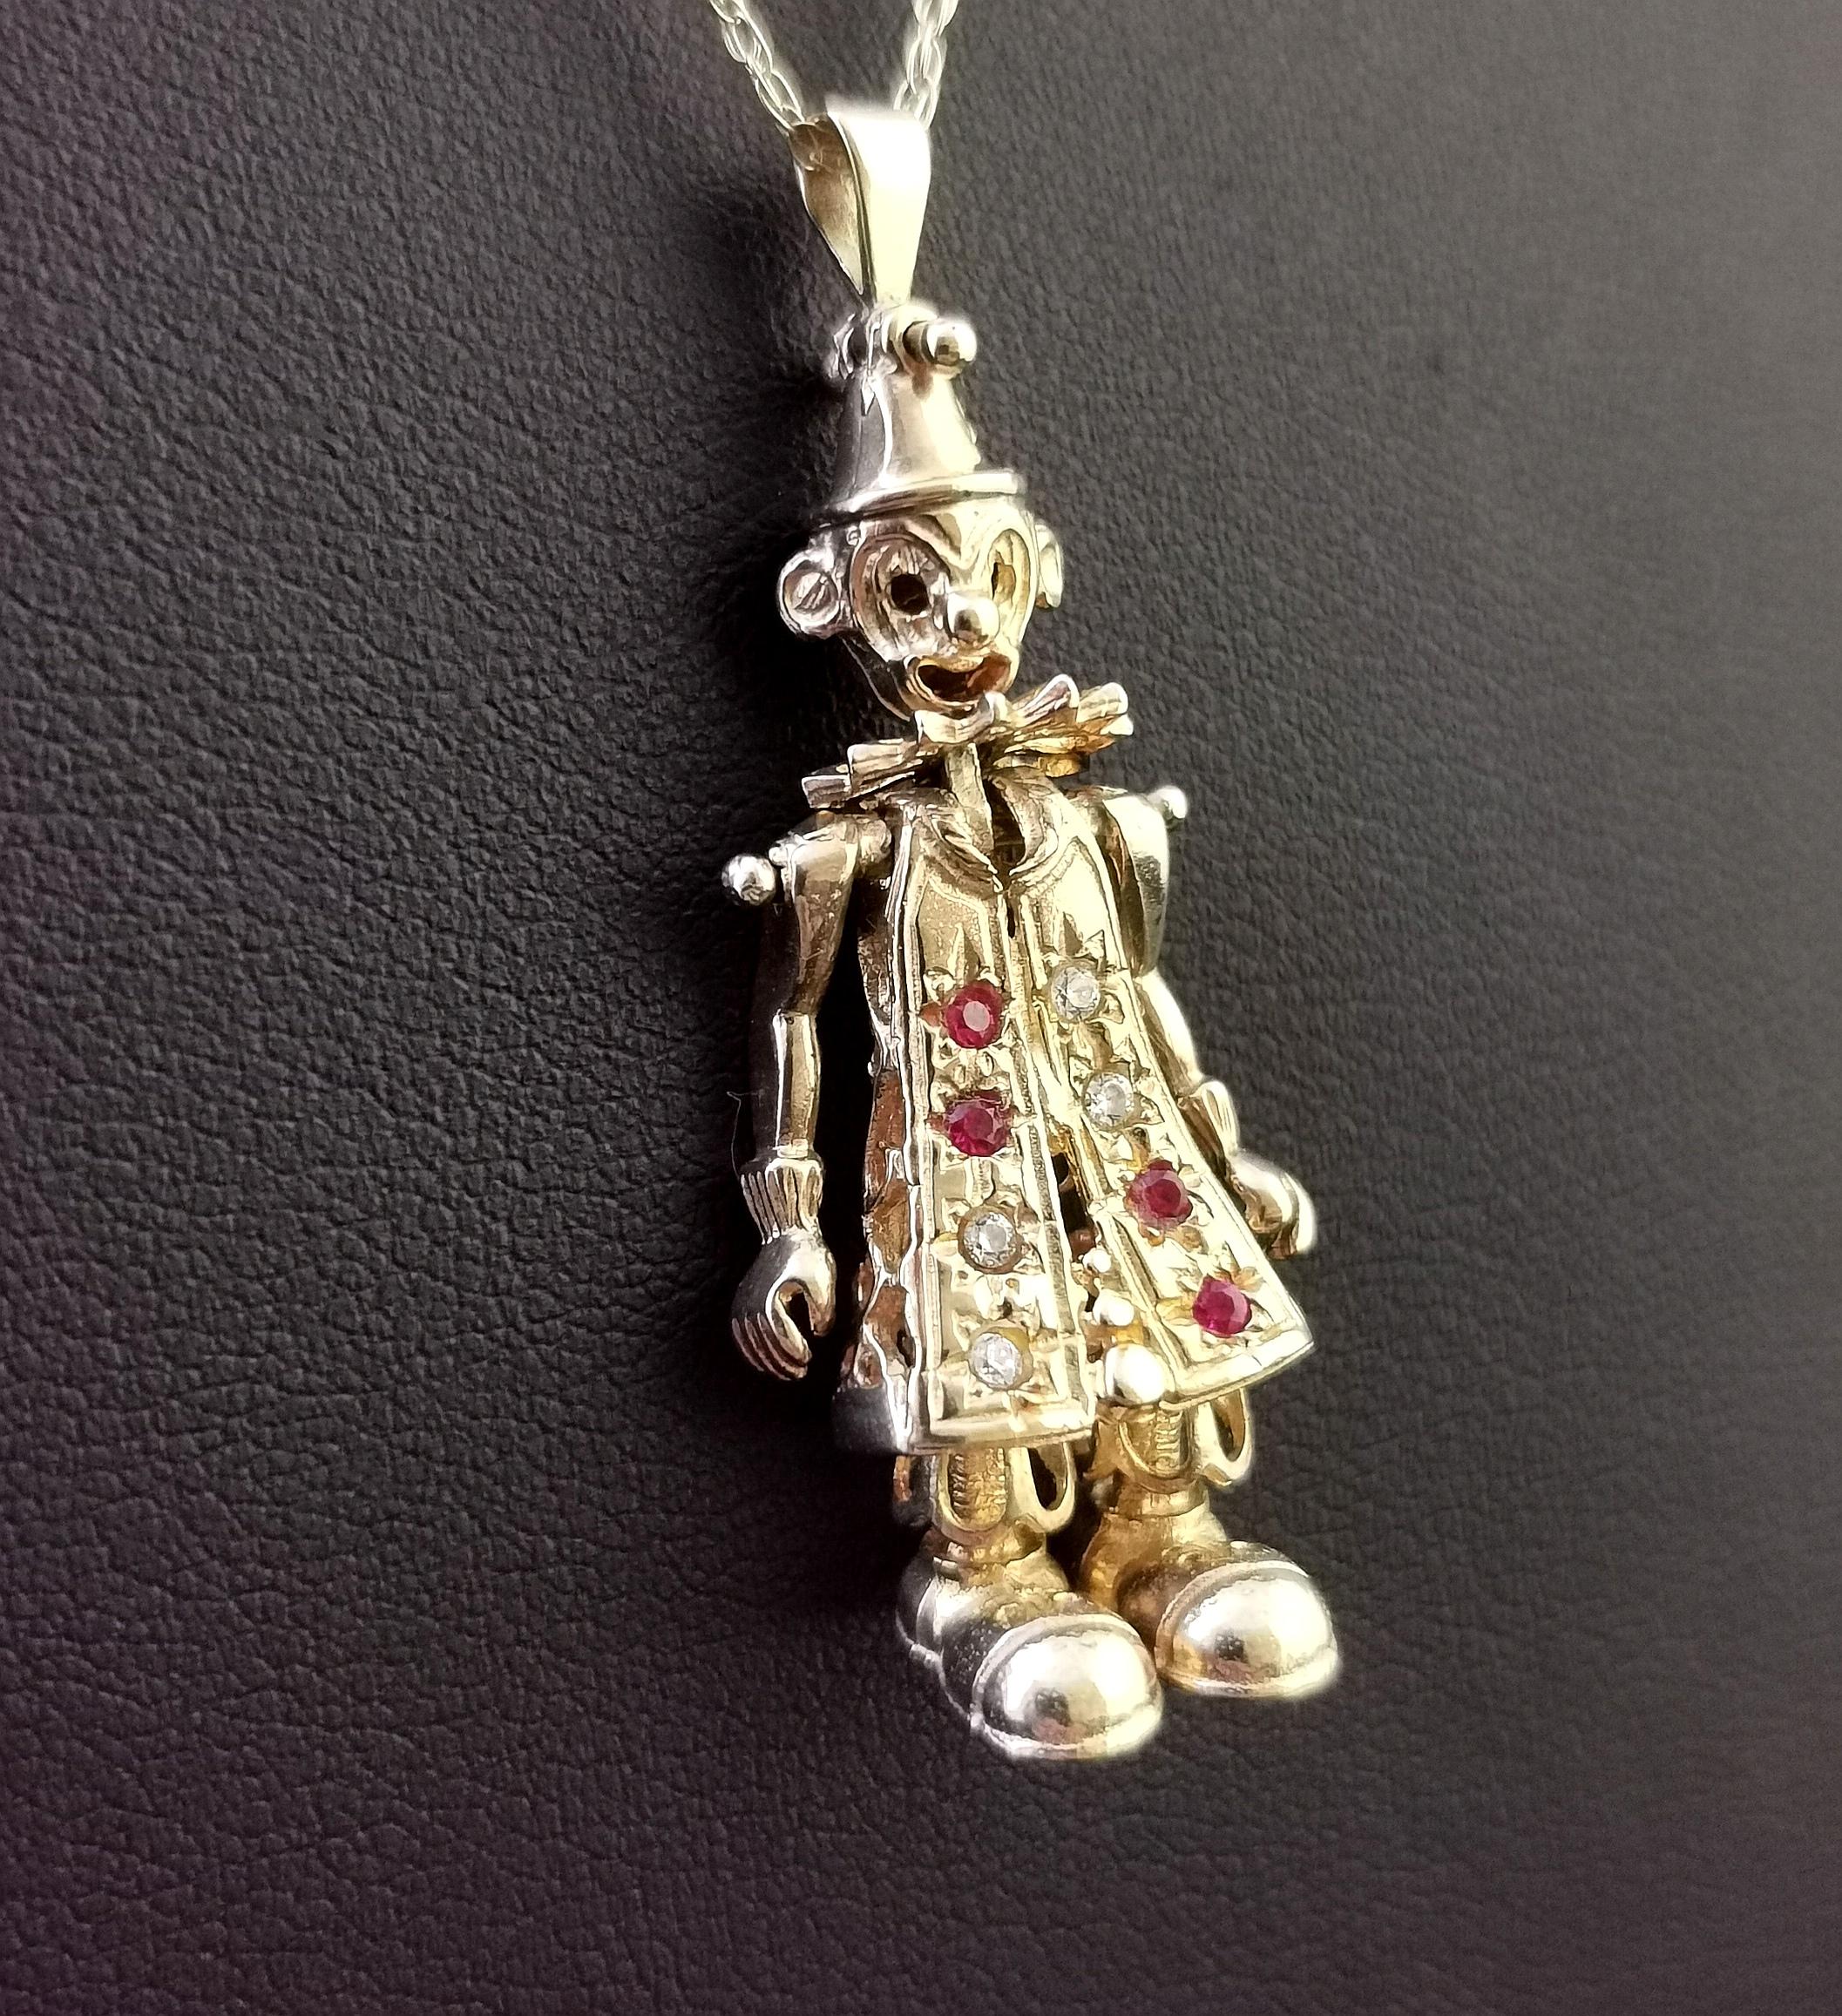 Vintage 9 Karat Yellow Gold Clown Pendant, Trace Link Necklace, Articulated 6